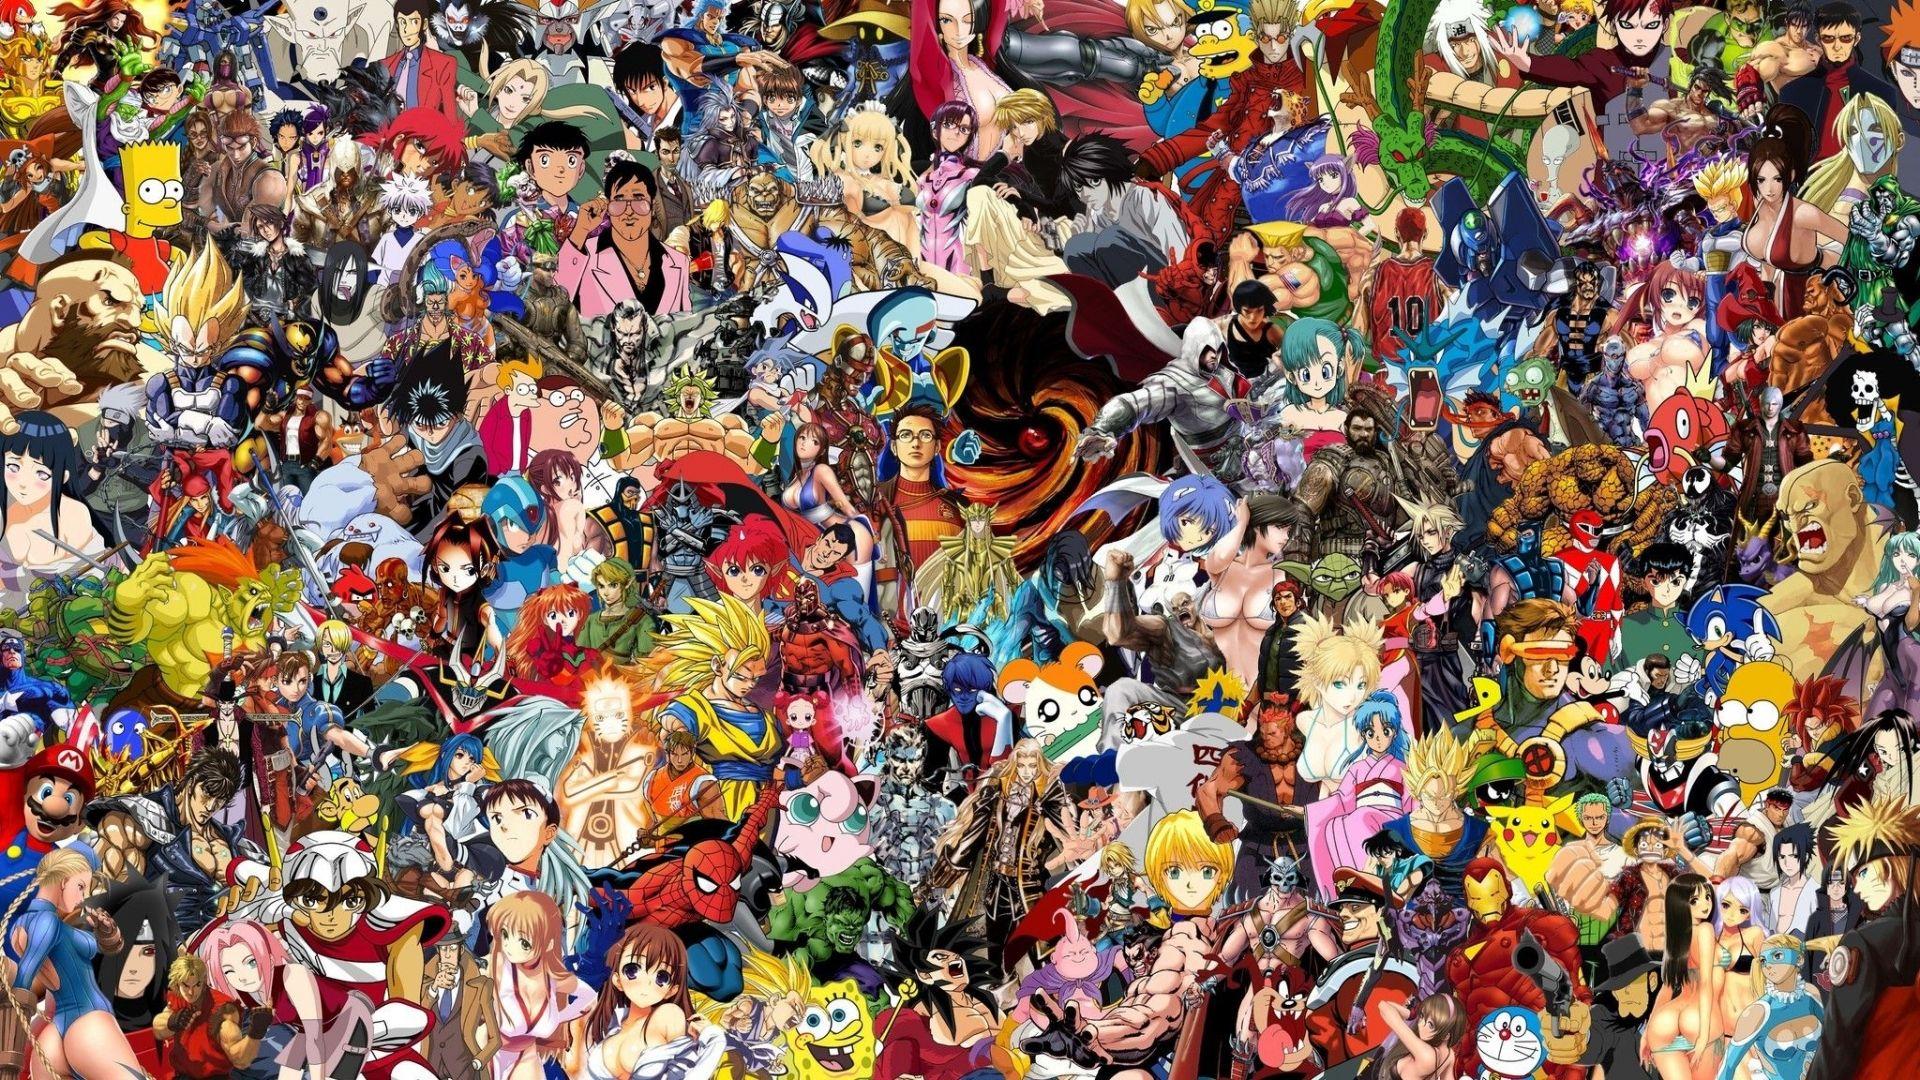 100+] Ps4 Anime Wallpapers | Wallpapers.com